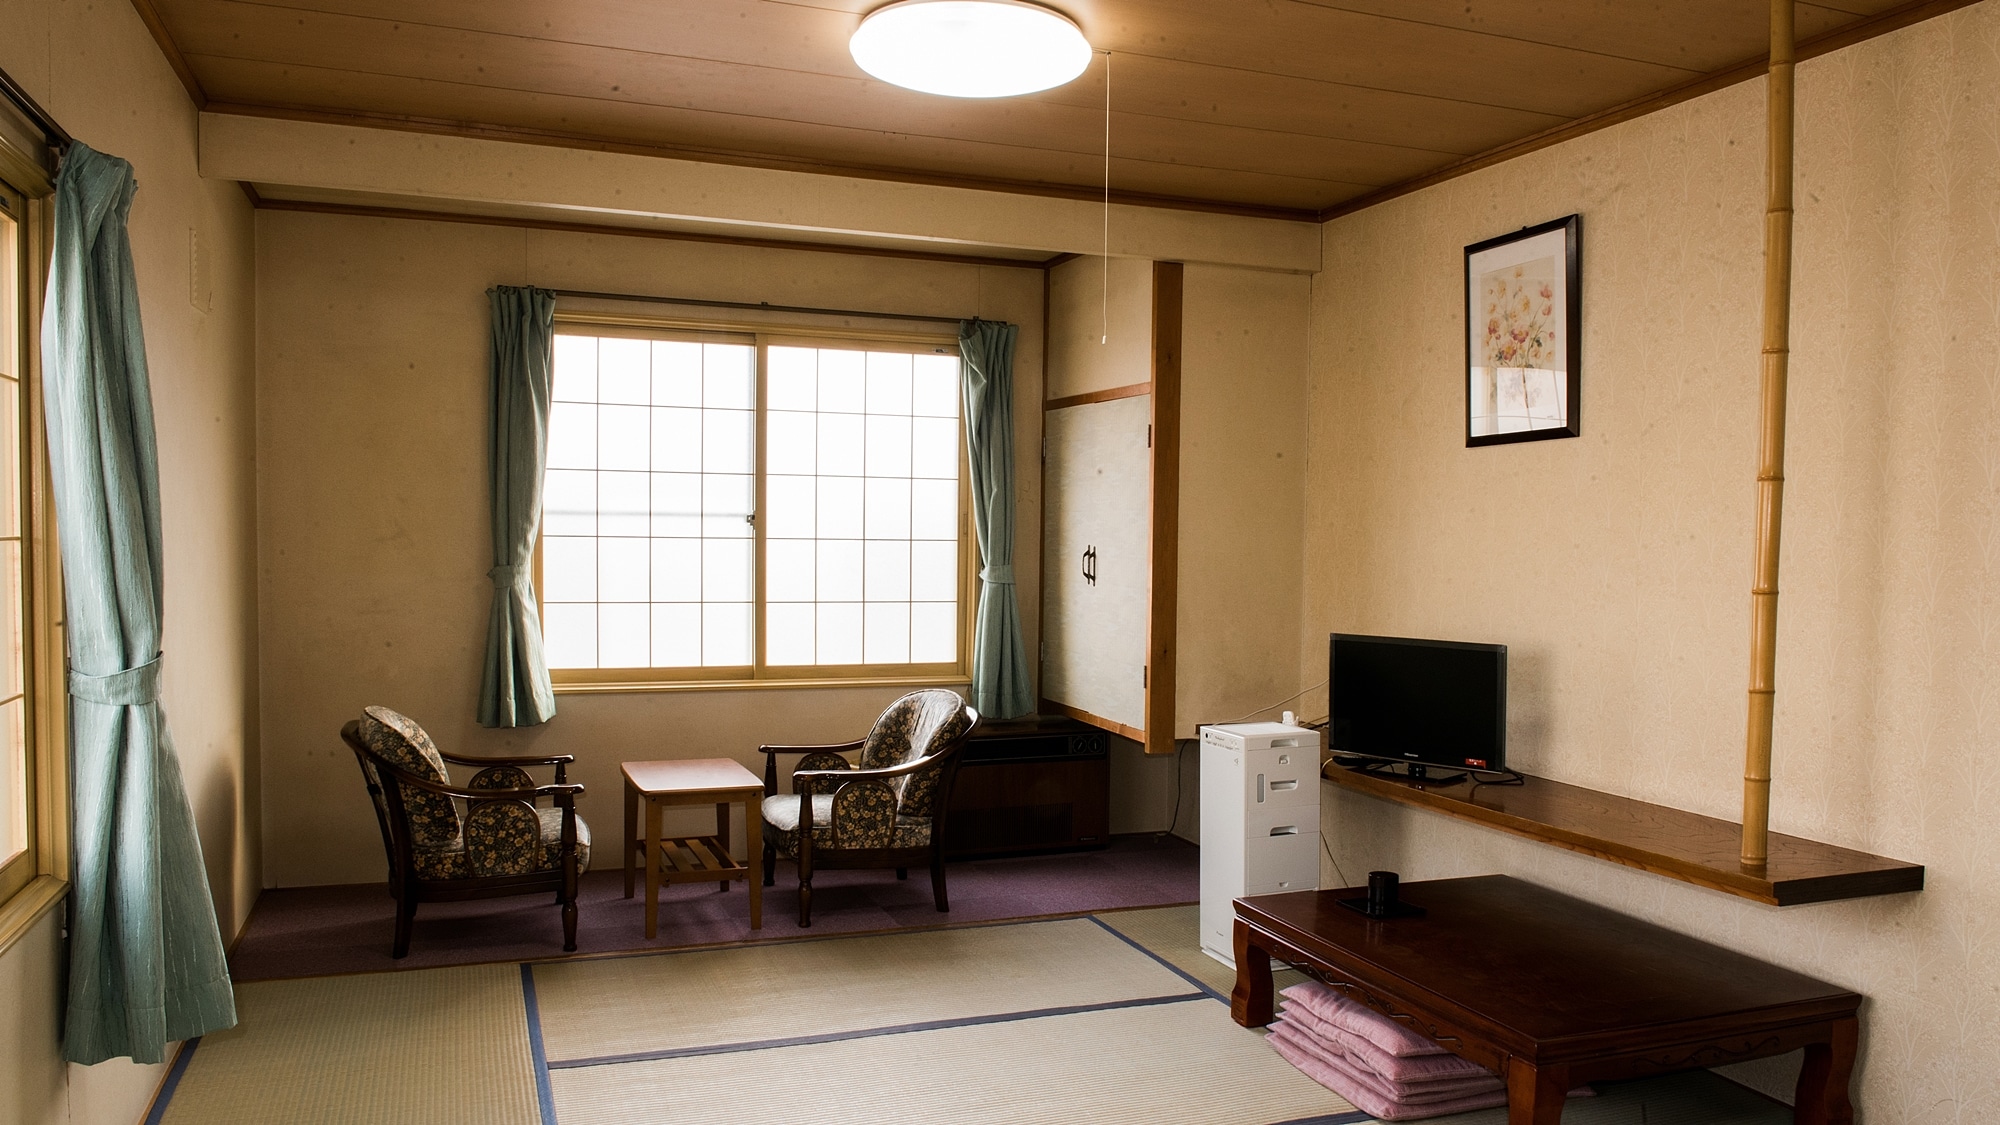 *[Guest room] 6 tatami mats: Up to 3 people can stay. Recommended for solo travelers, business travelers, and couples